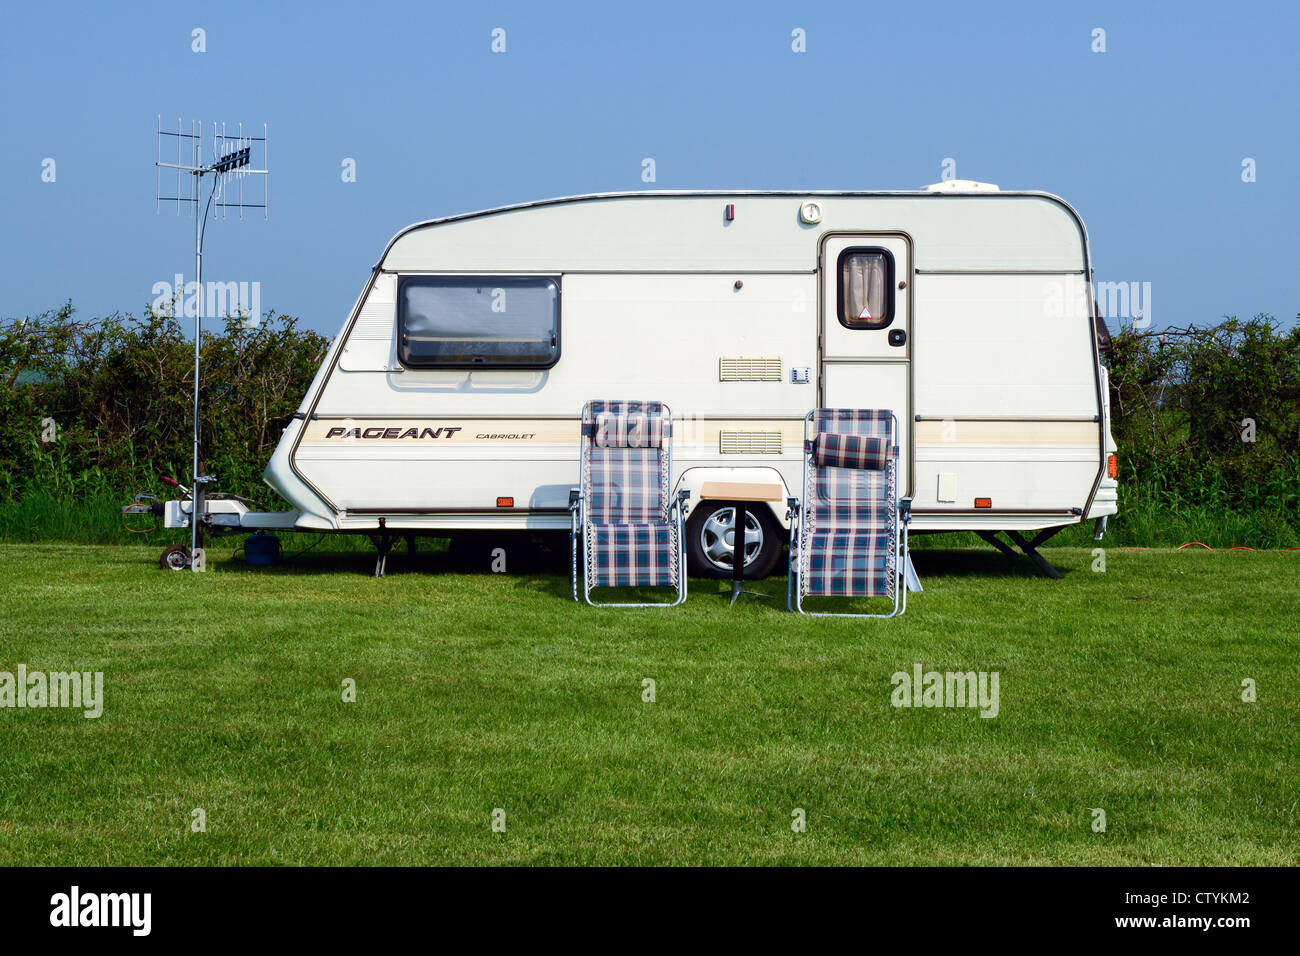 camper van with two sunchairs and tv antenna Stock Photo